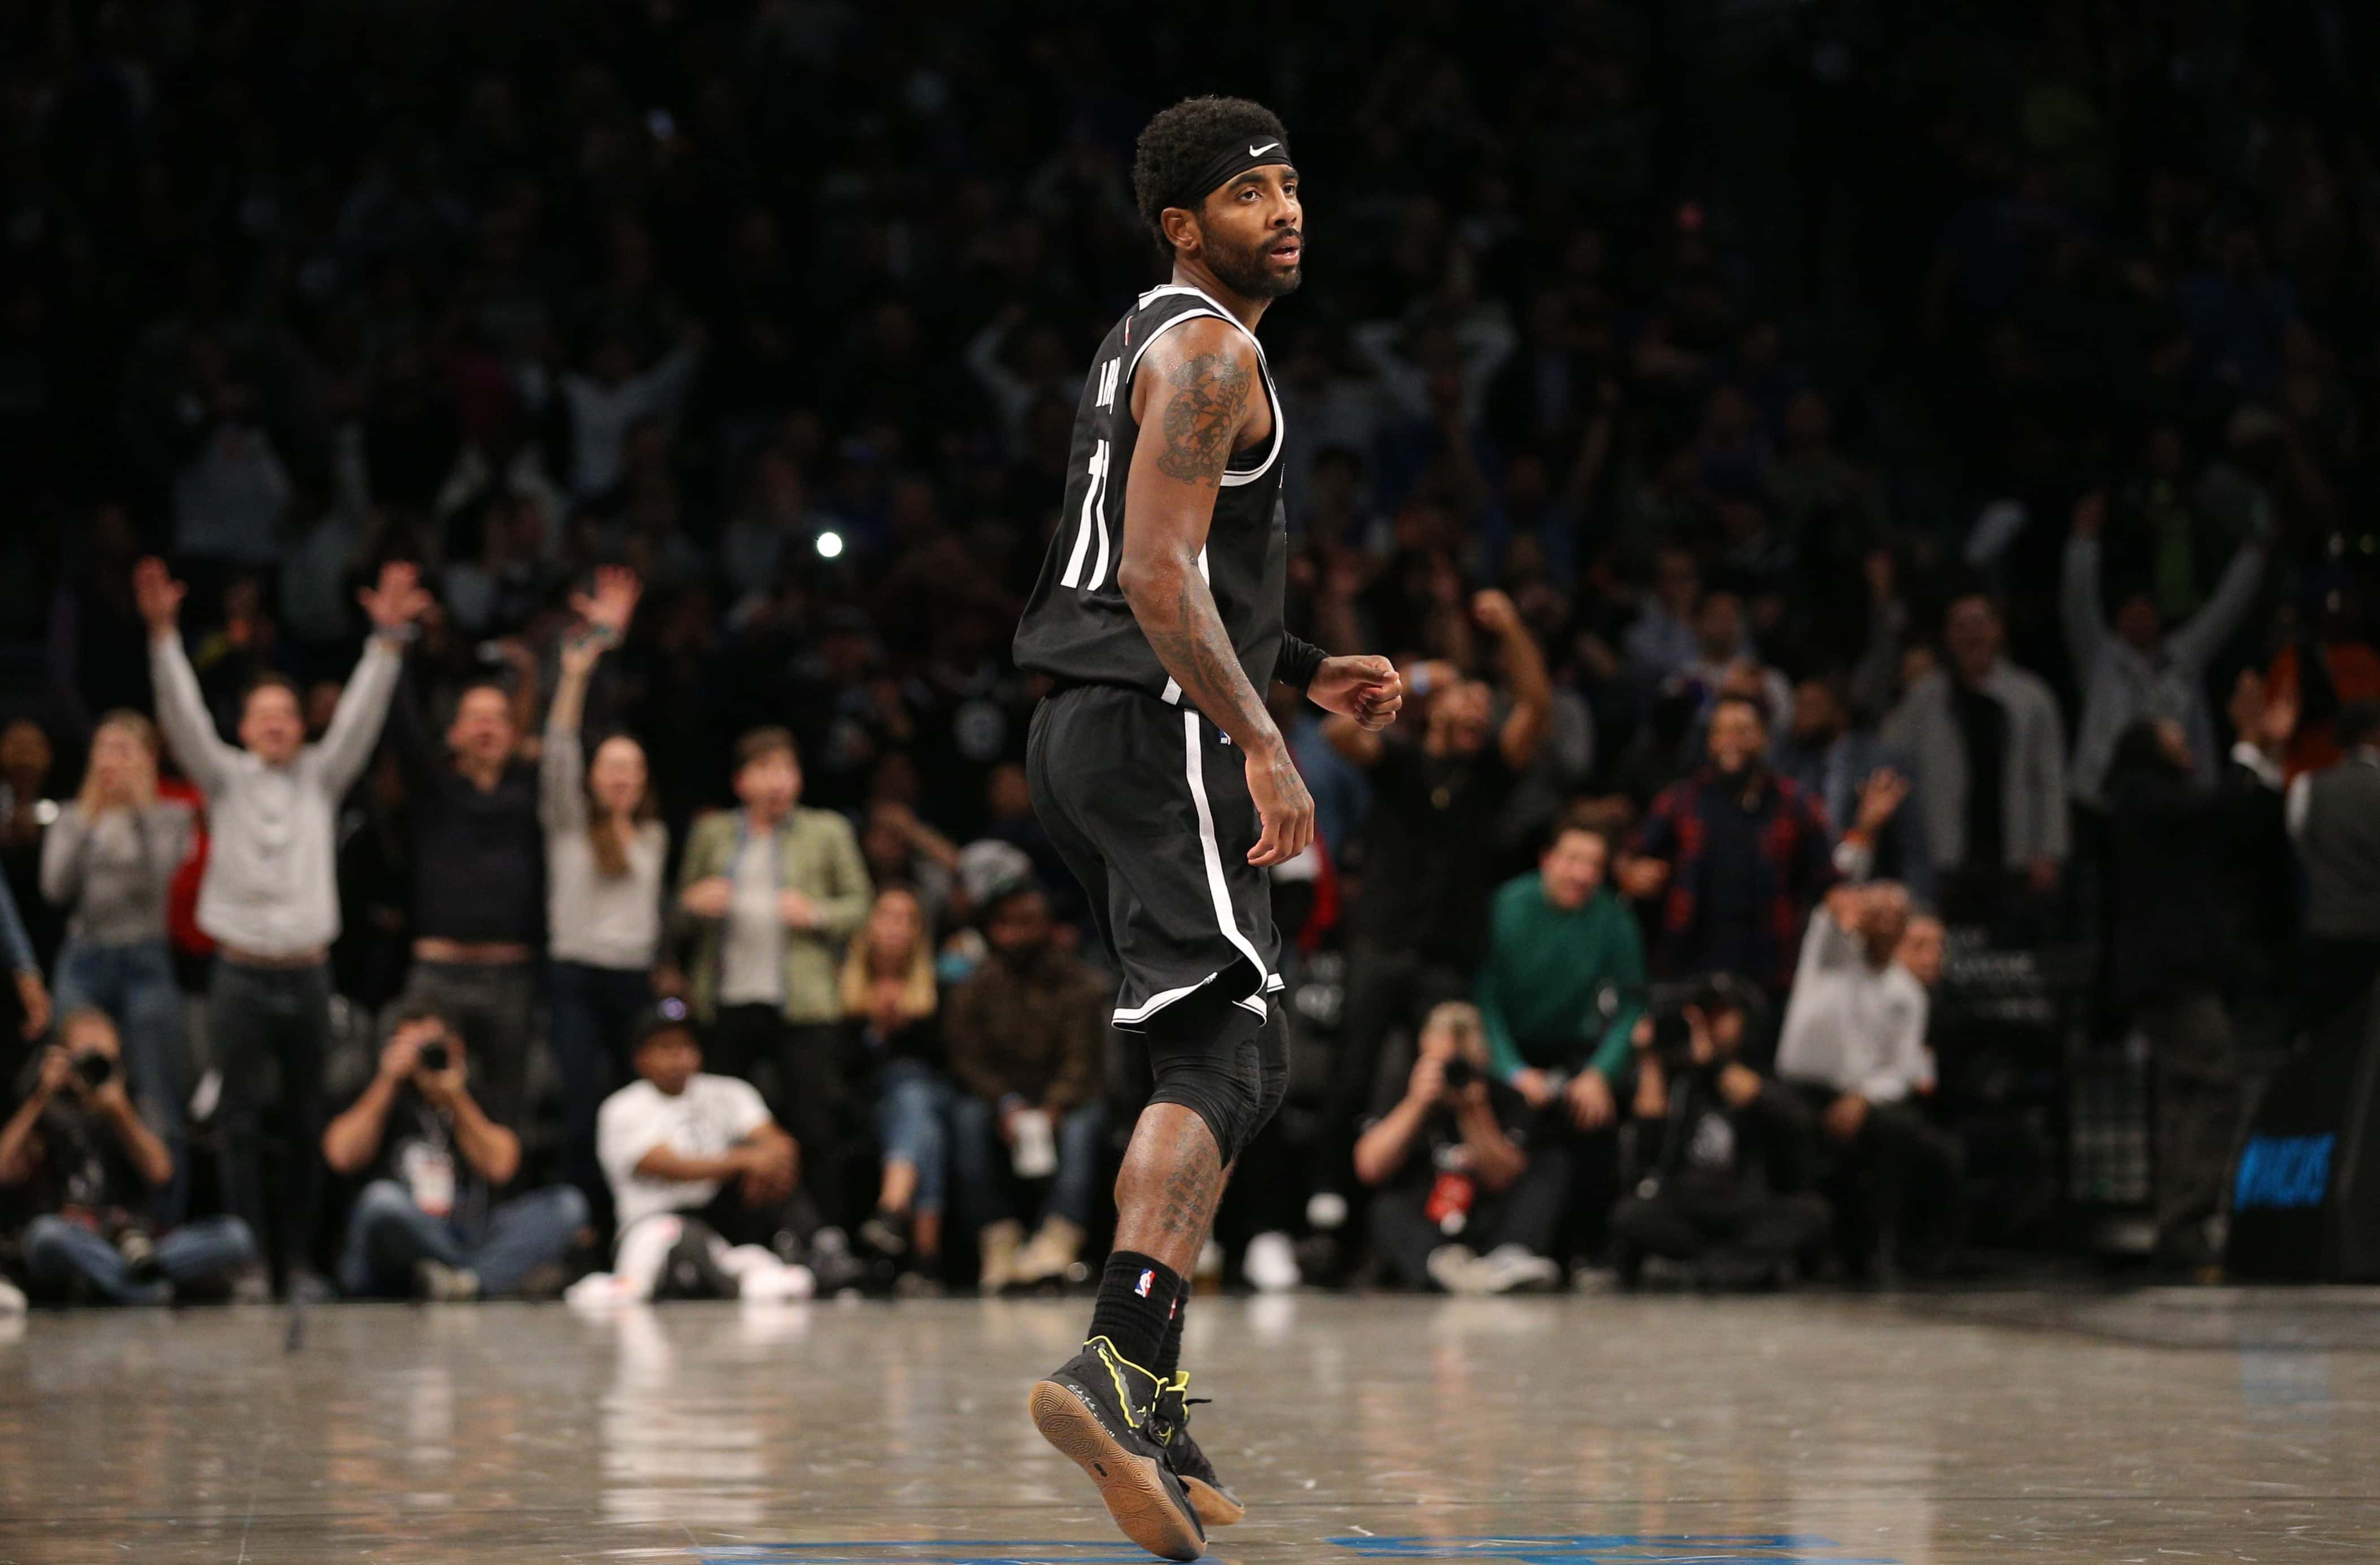 Oct 25, 2019; Brooklyn, NY, USA; Brooklyn Nets point guard Kyrie Irving (11) reacts after making the game winning shot against the New York Knicks during the fourth quarter at Barclays Center. Mandatory Credit: Brad Penner-USA TODAY Sports